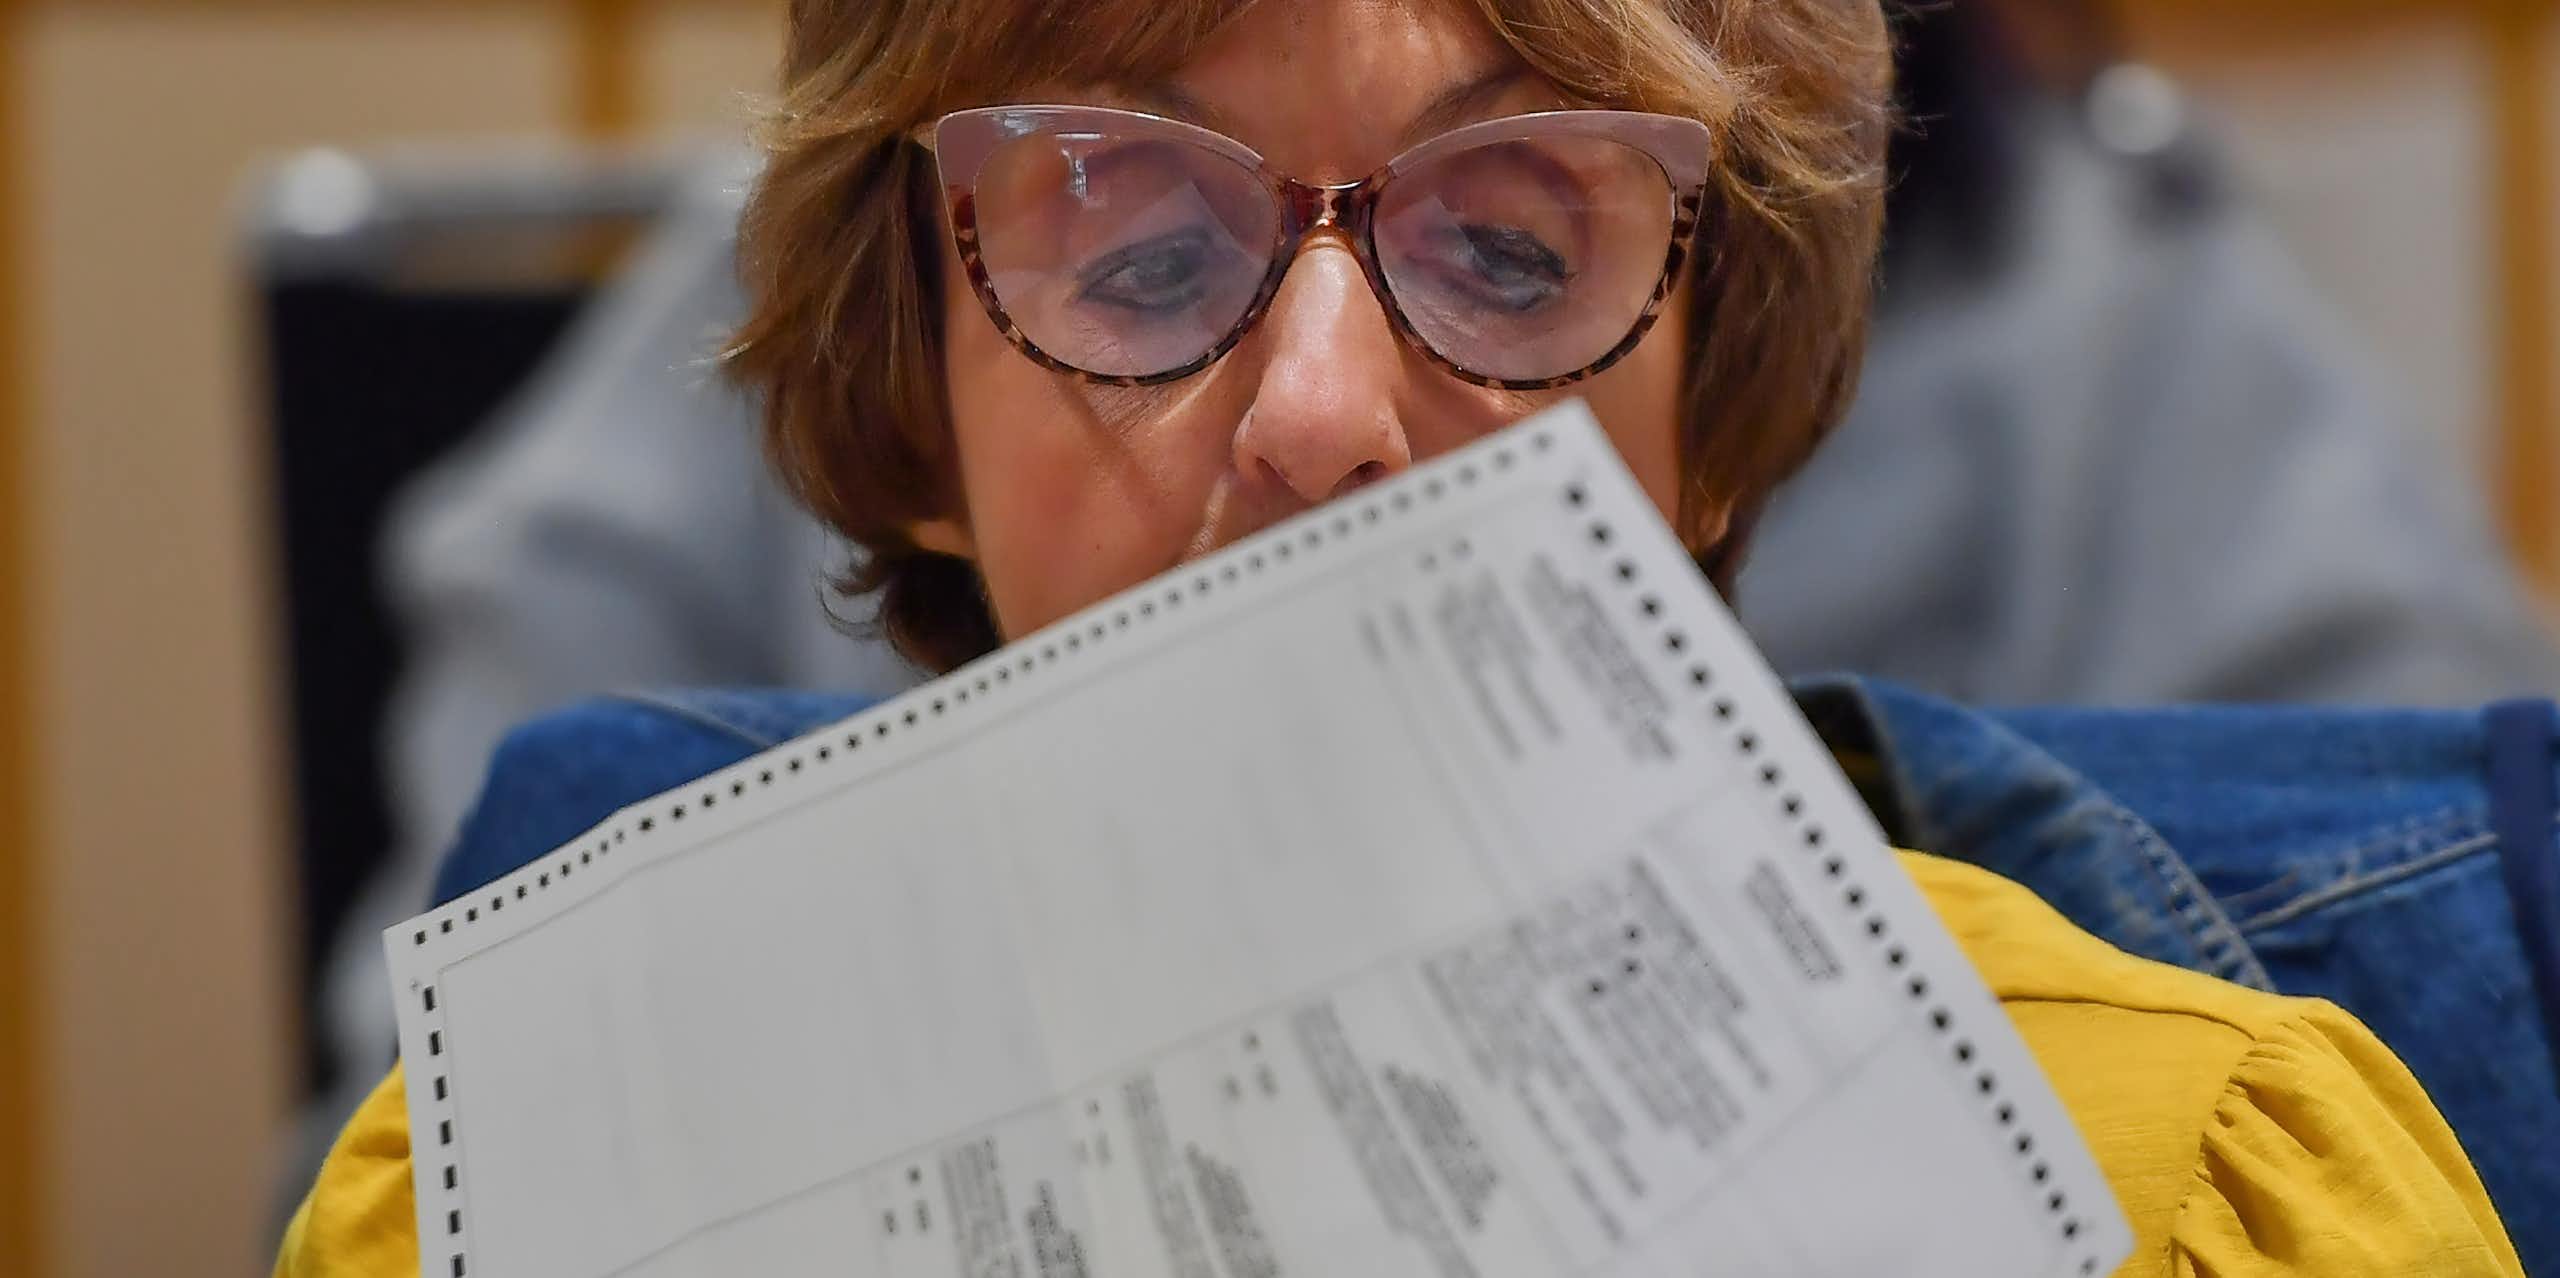 A person wearing glasses holds a printed piece of paper up for a closer look.